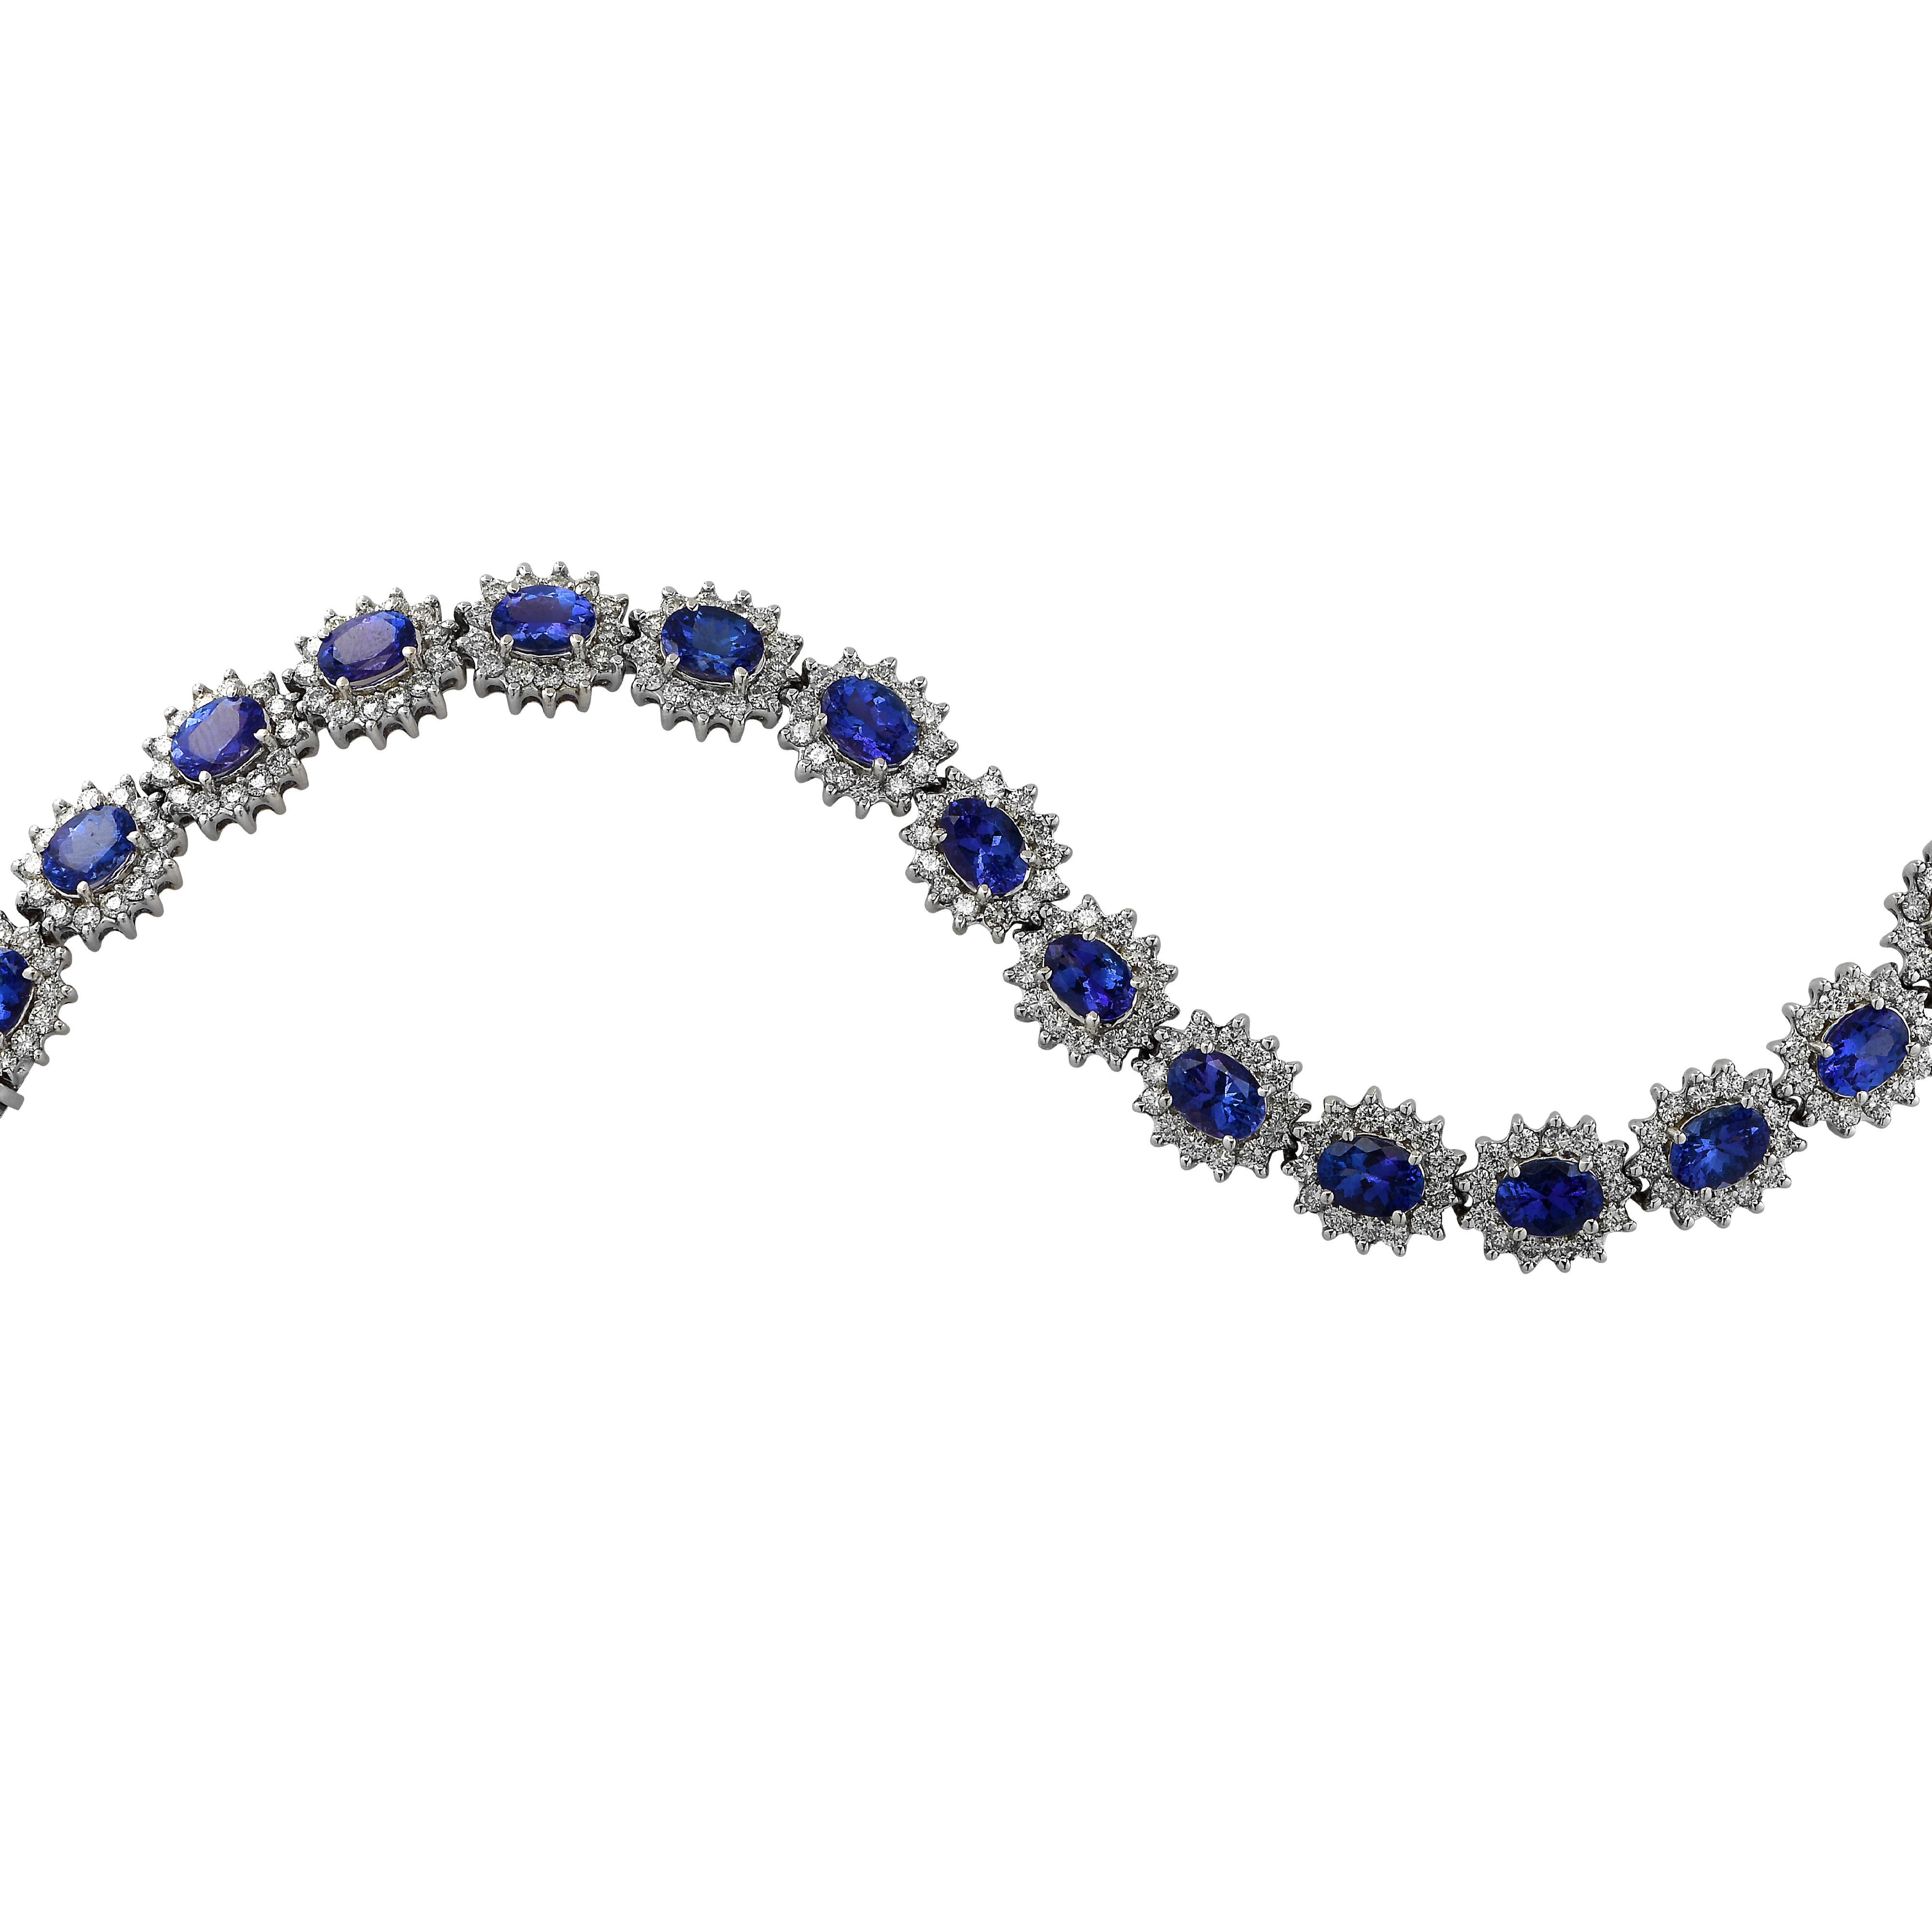 Stunning bracelet crafted in white gold, showcasing 16 oval cut tanzanites weighing approximately 16.70 carats total, and 196 round brilliant cut diamonds weighing approximately 6 carats total, H-I color VS-SI clarity. This regal bracelet measures